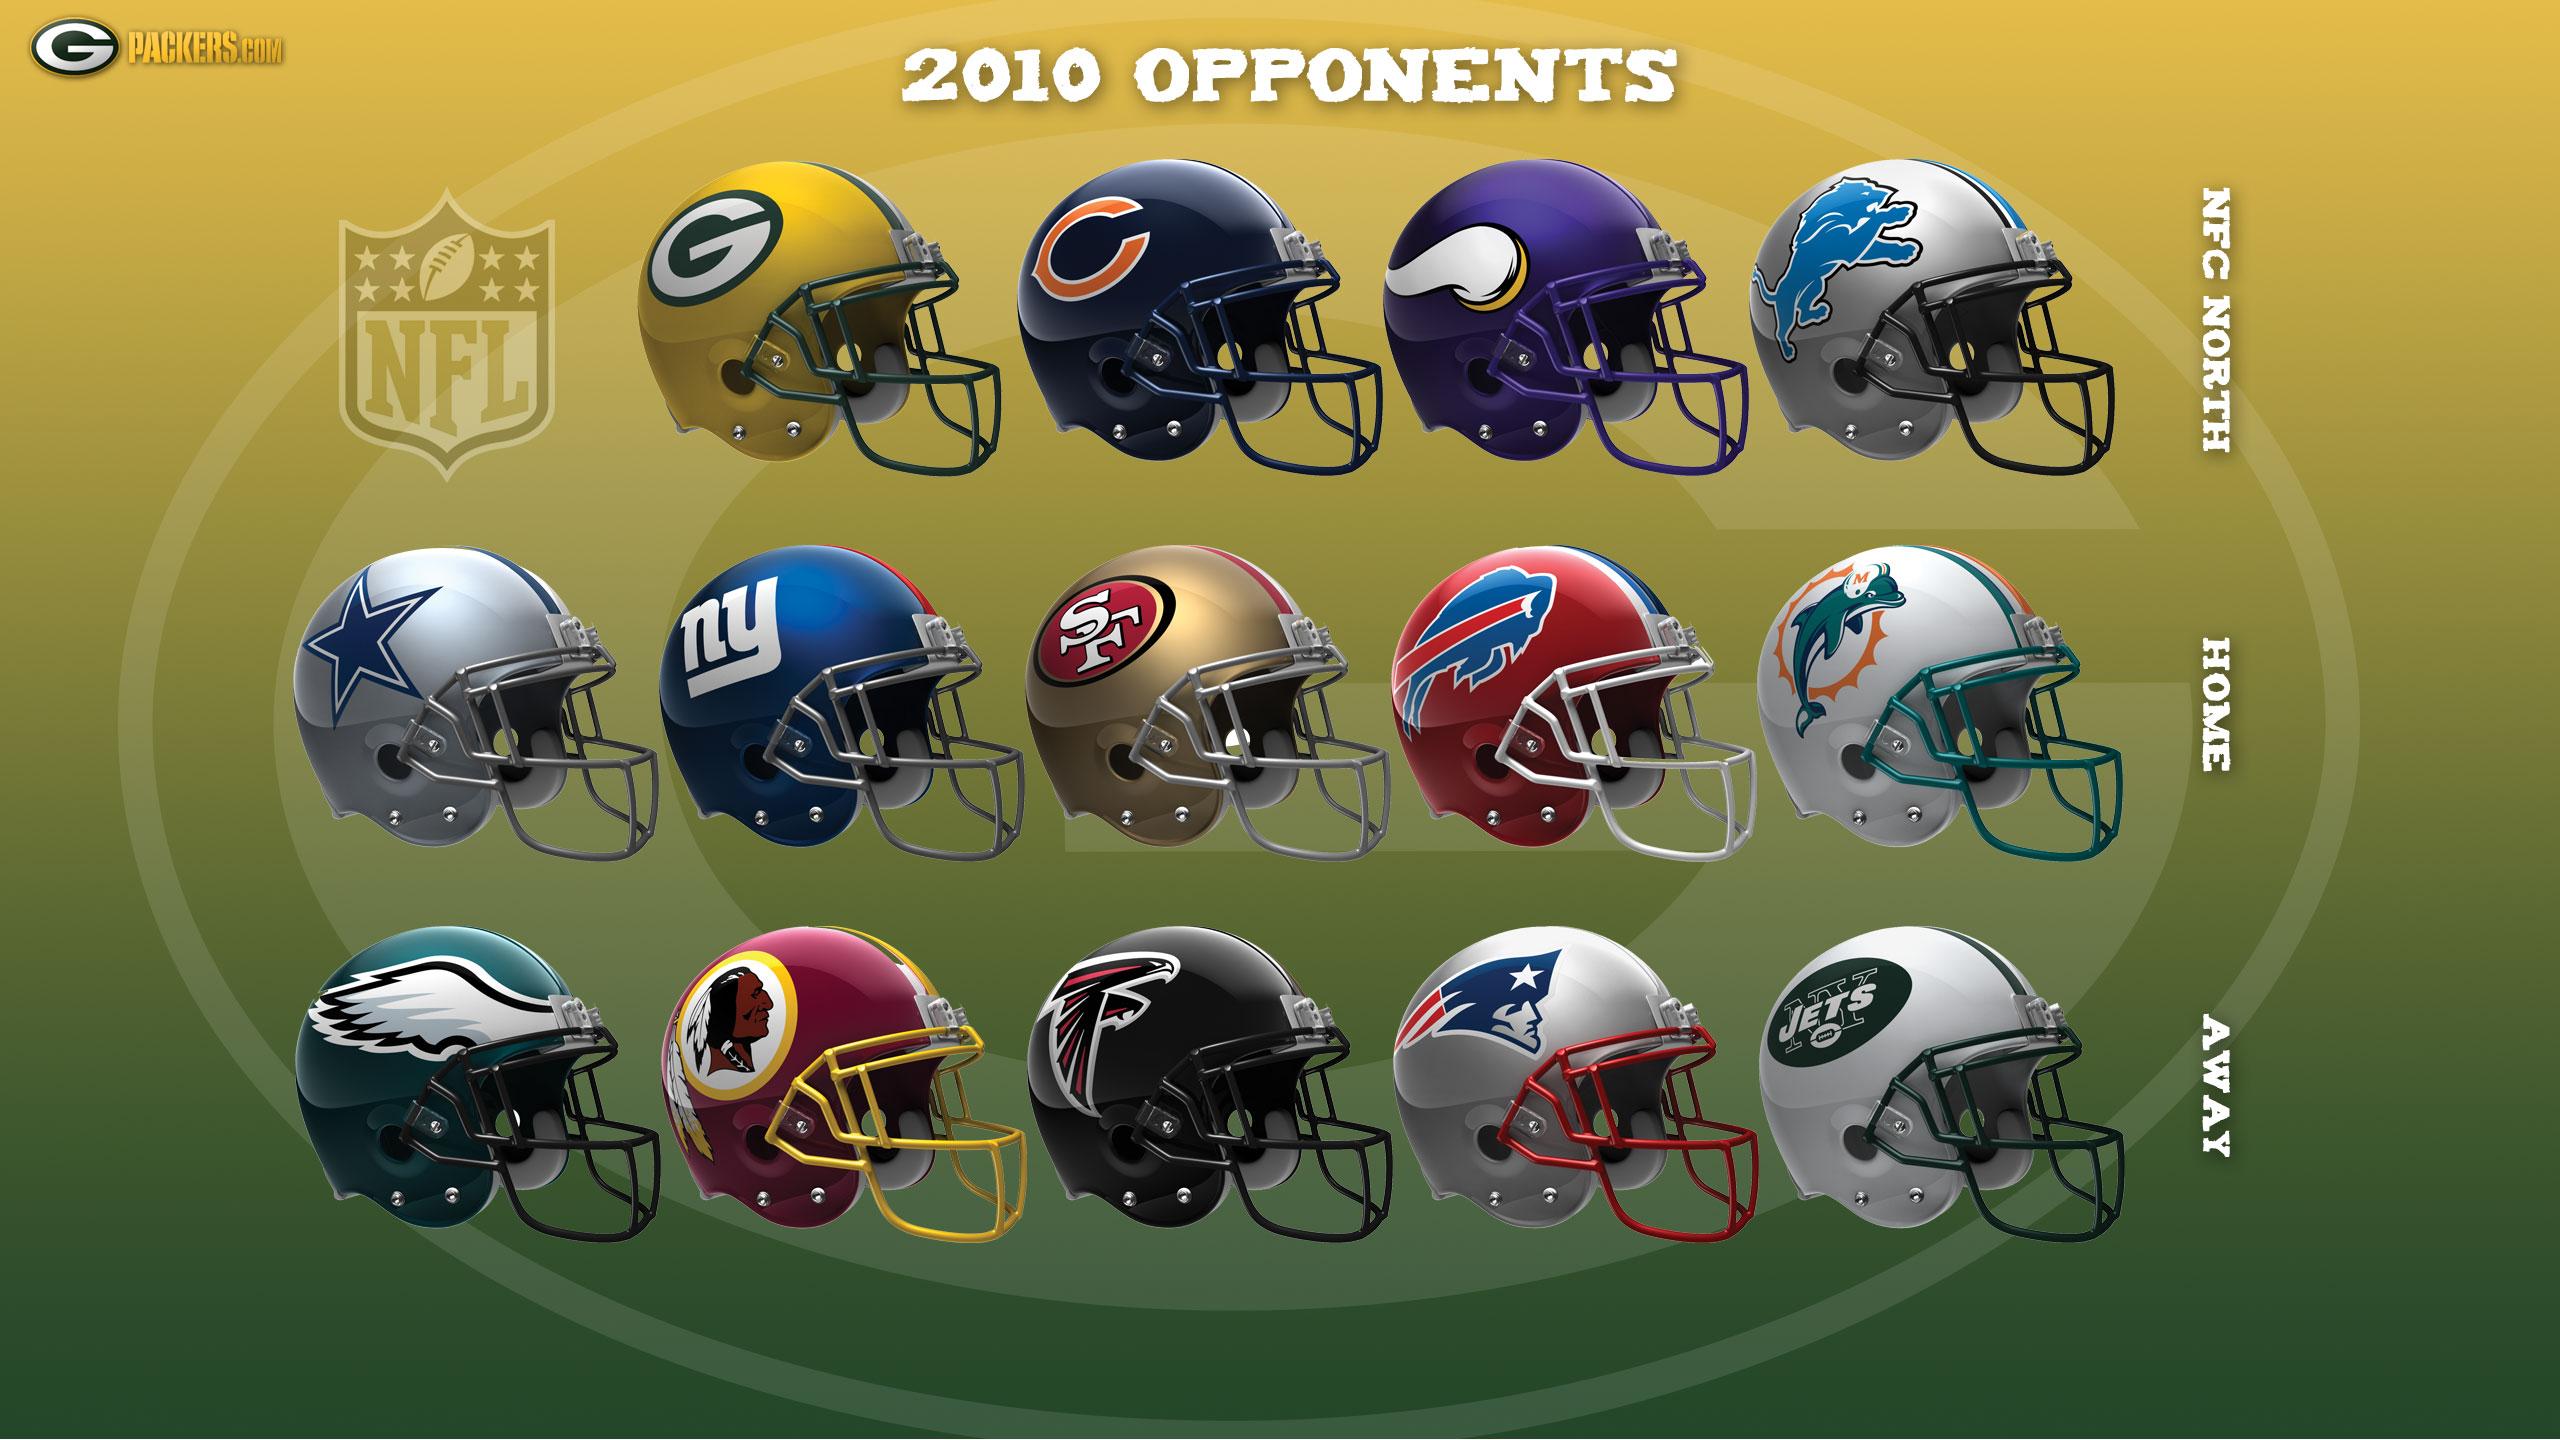 2010 Opponents